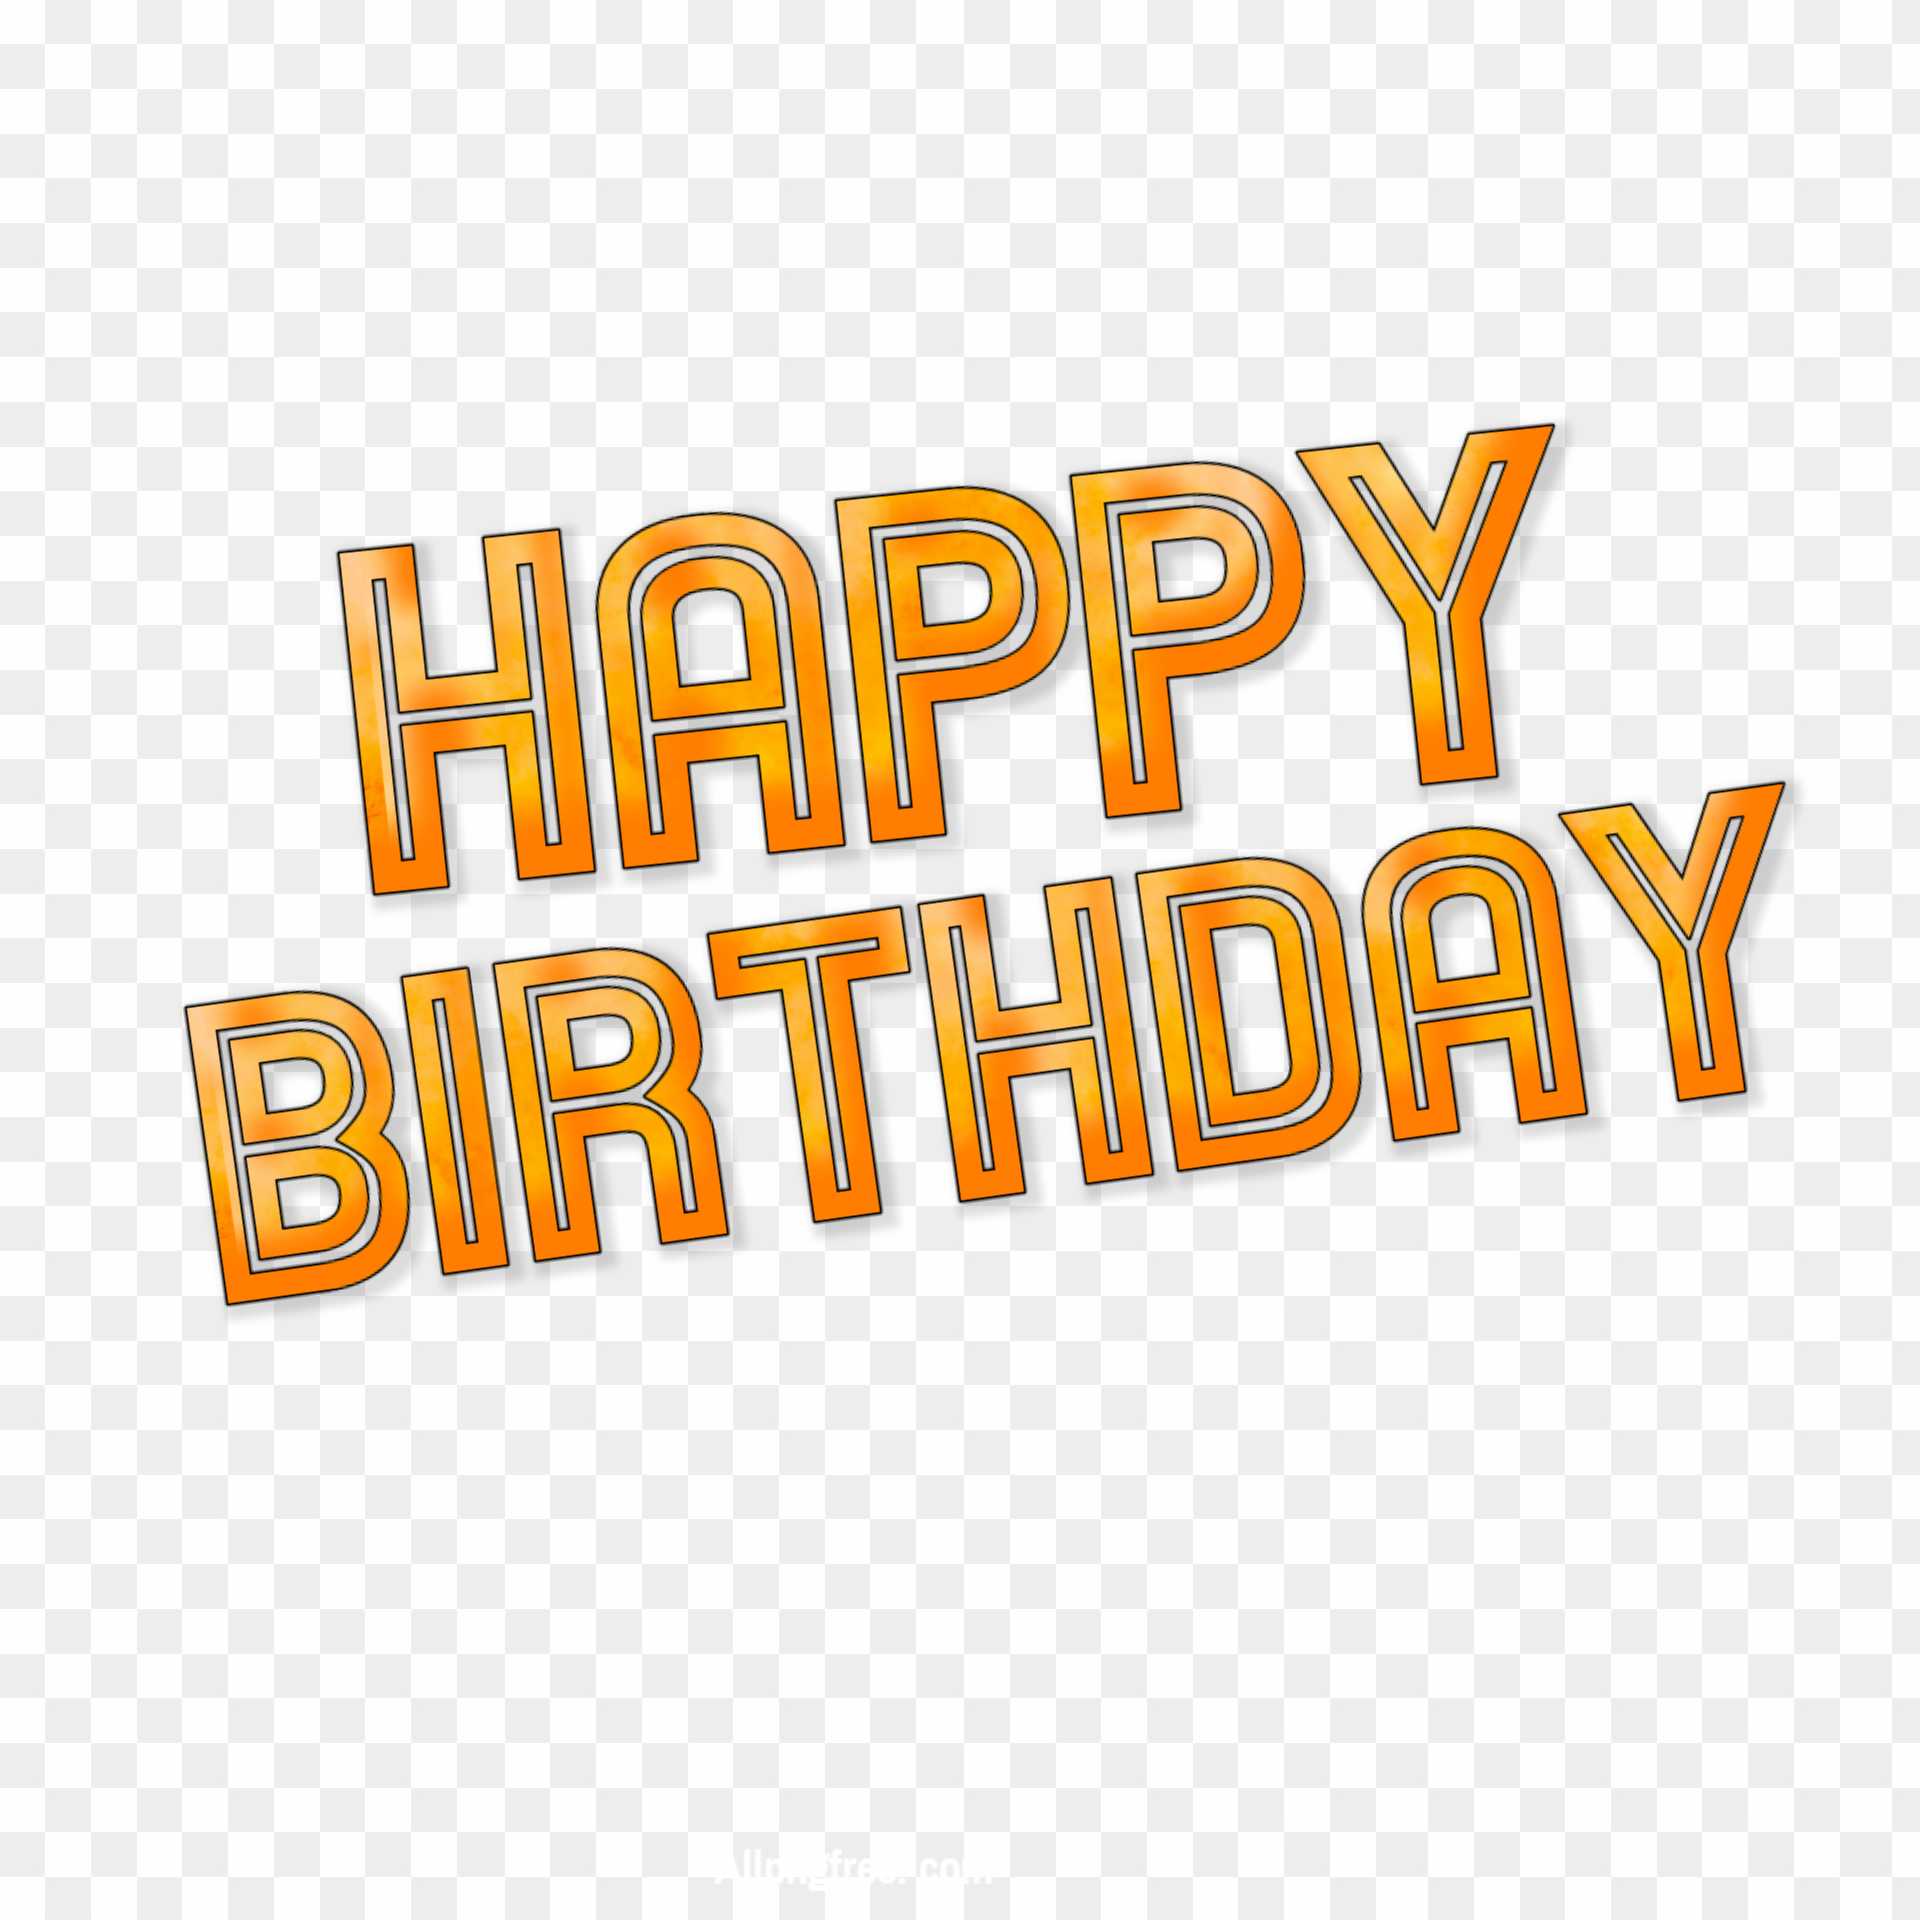 Stylist happy birthday text PNG images download 